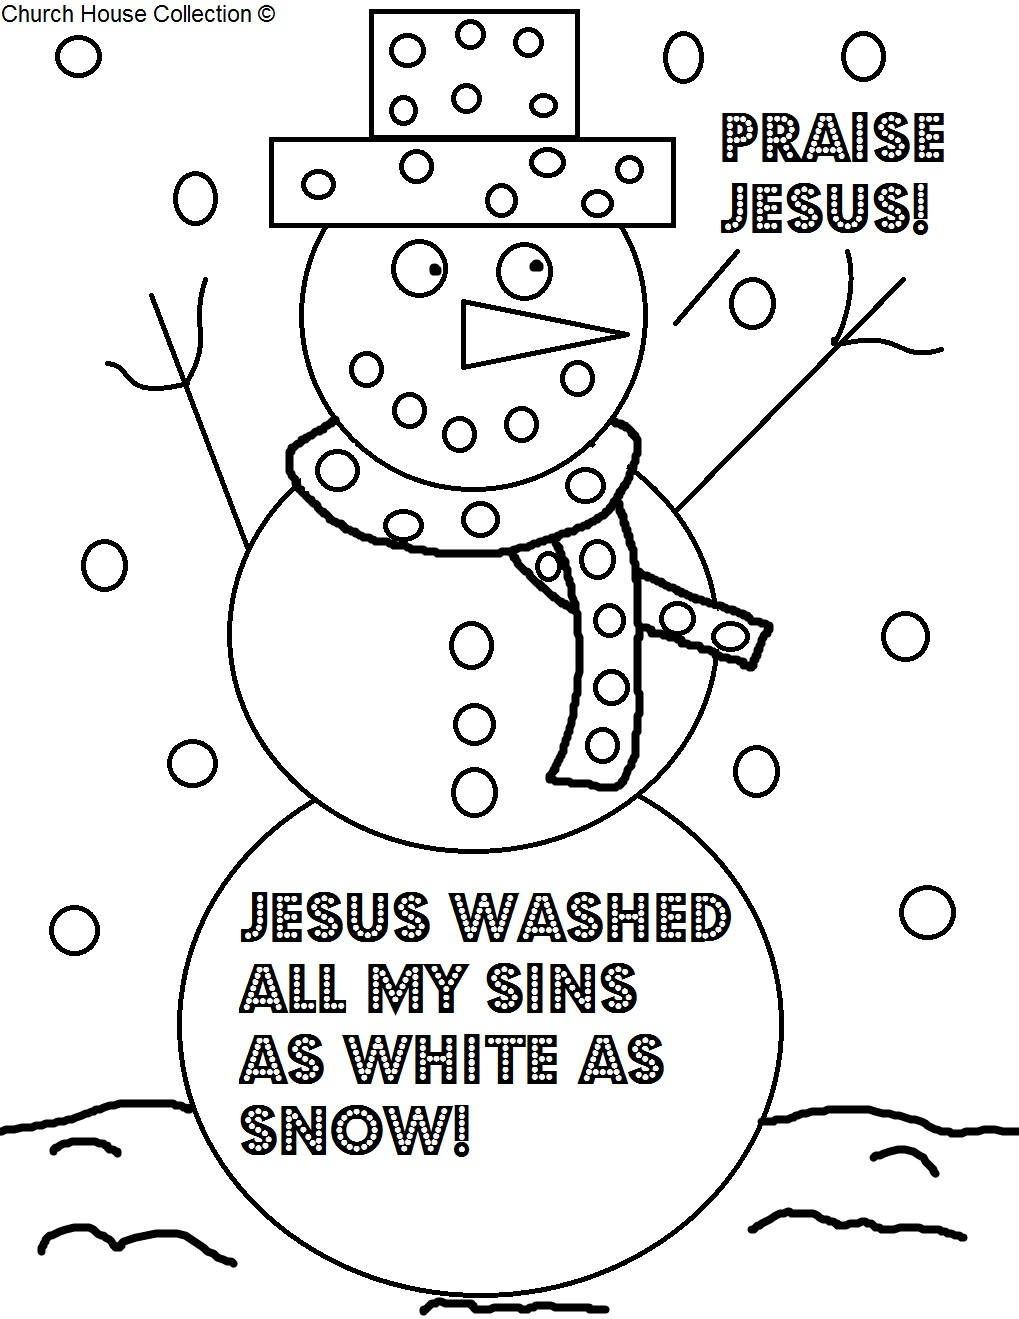 Coloring Pages : Sunday School Coloringges Noahgesfree About - Free Printable Sunday School Coloring Sheets